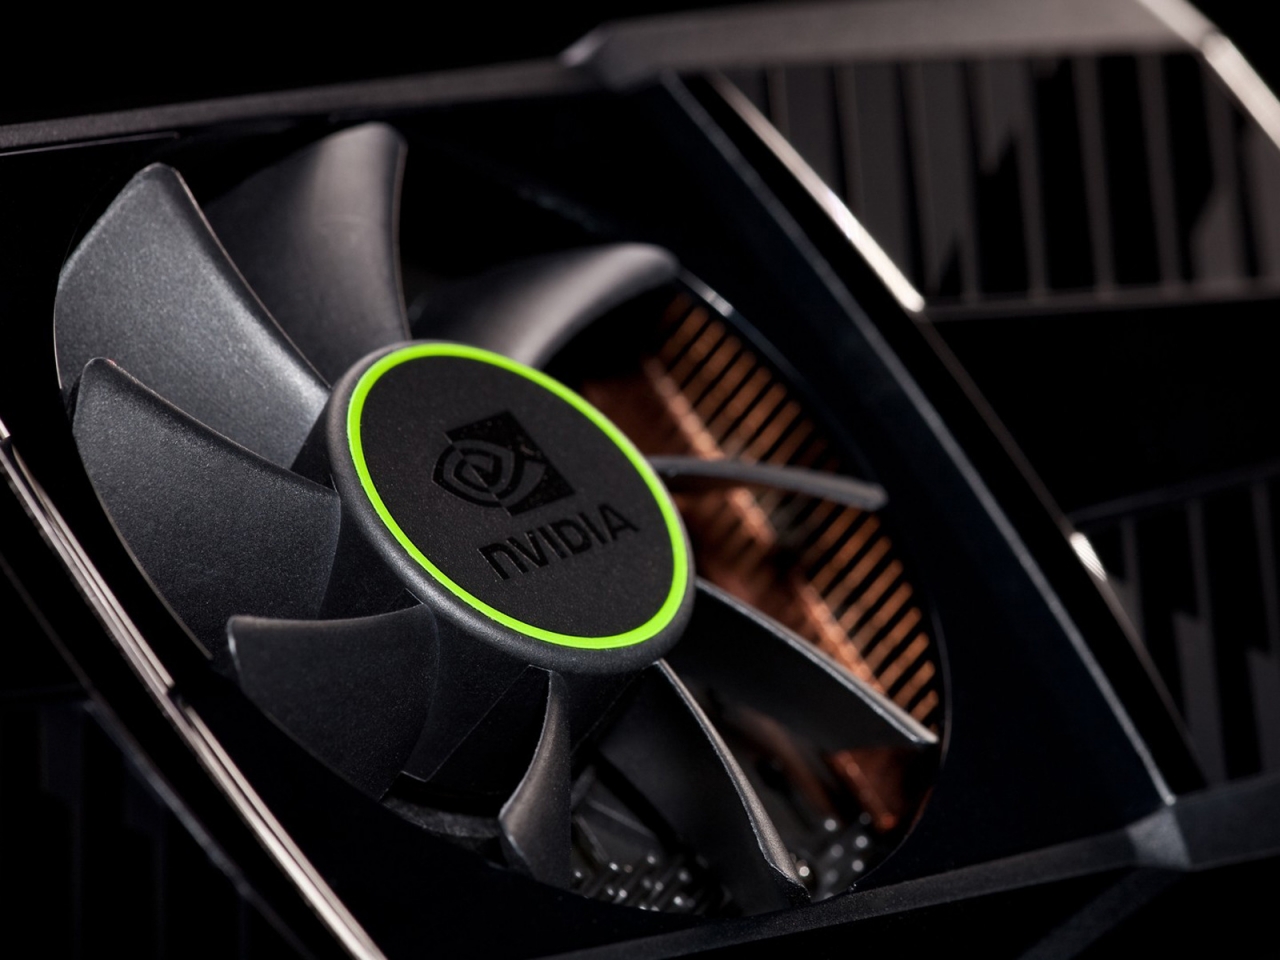 nVidia Cooler for 1280 x 960 resolution